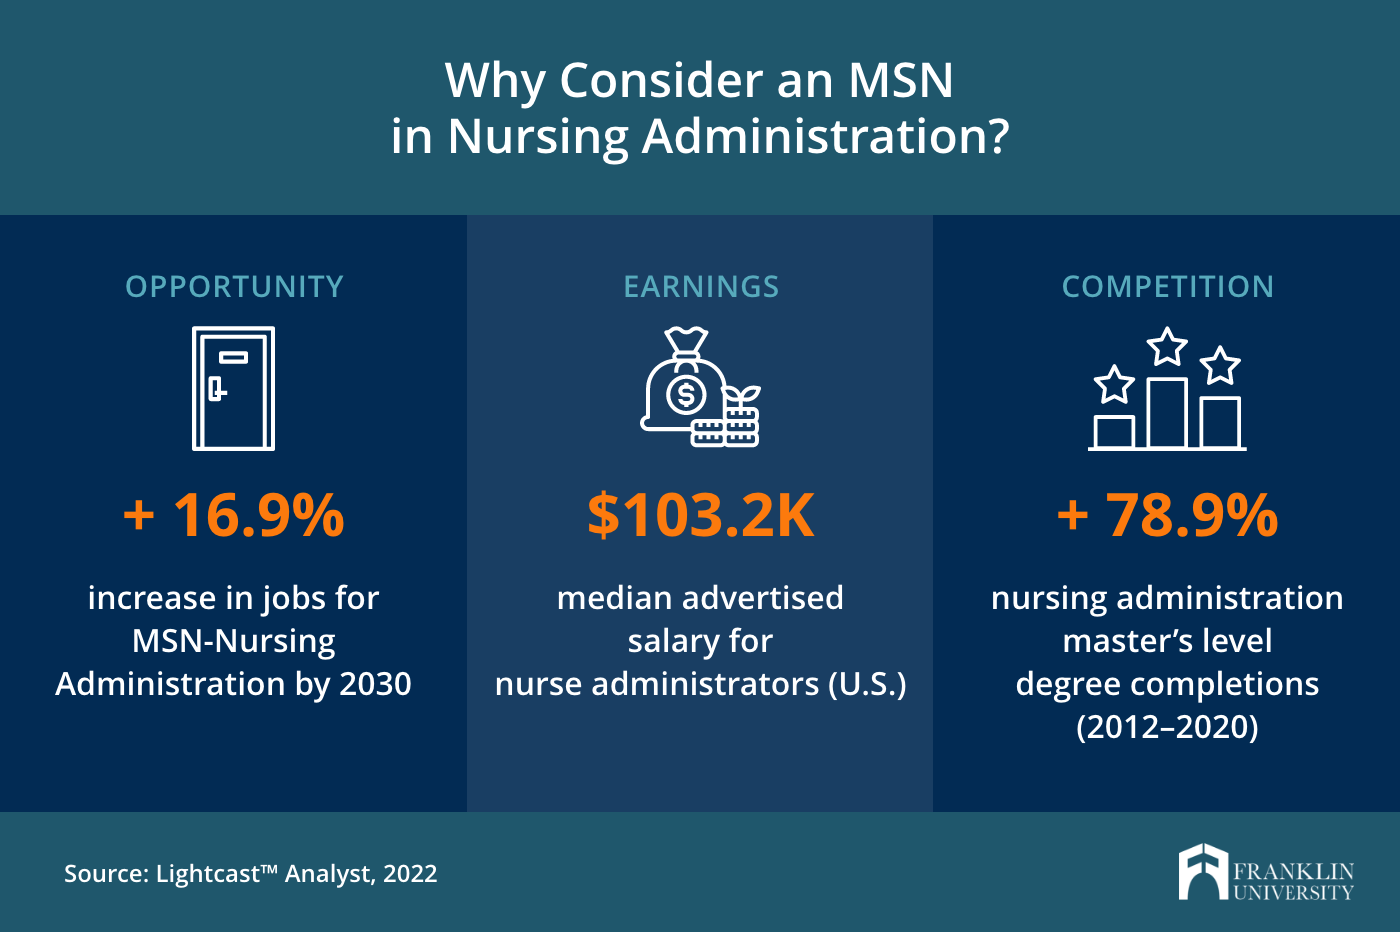 How Long Does It Take to Earn a Master's Degree in Nursing Online?